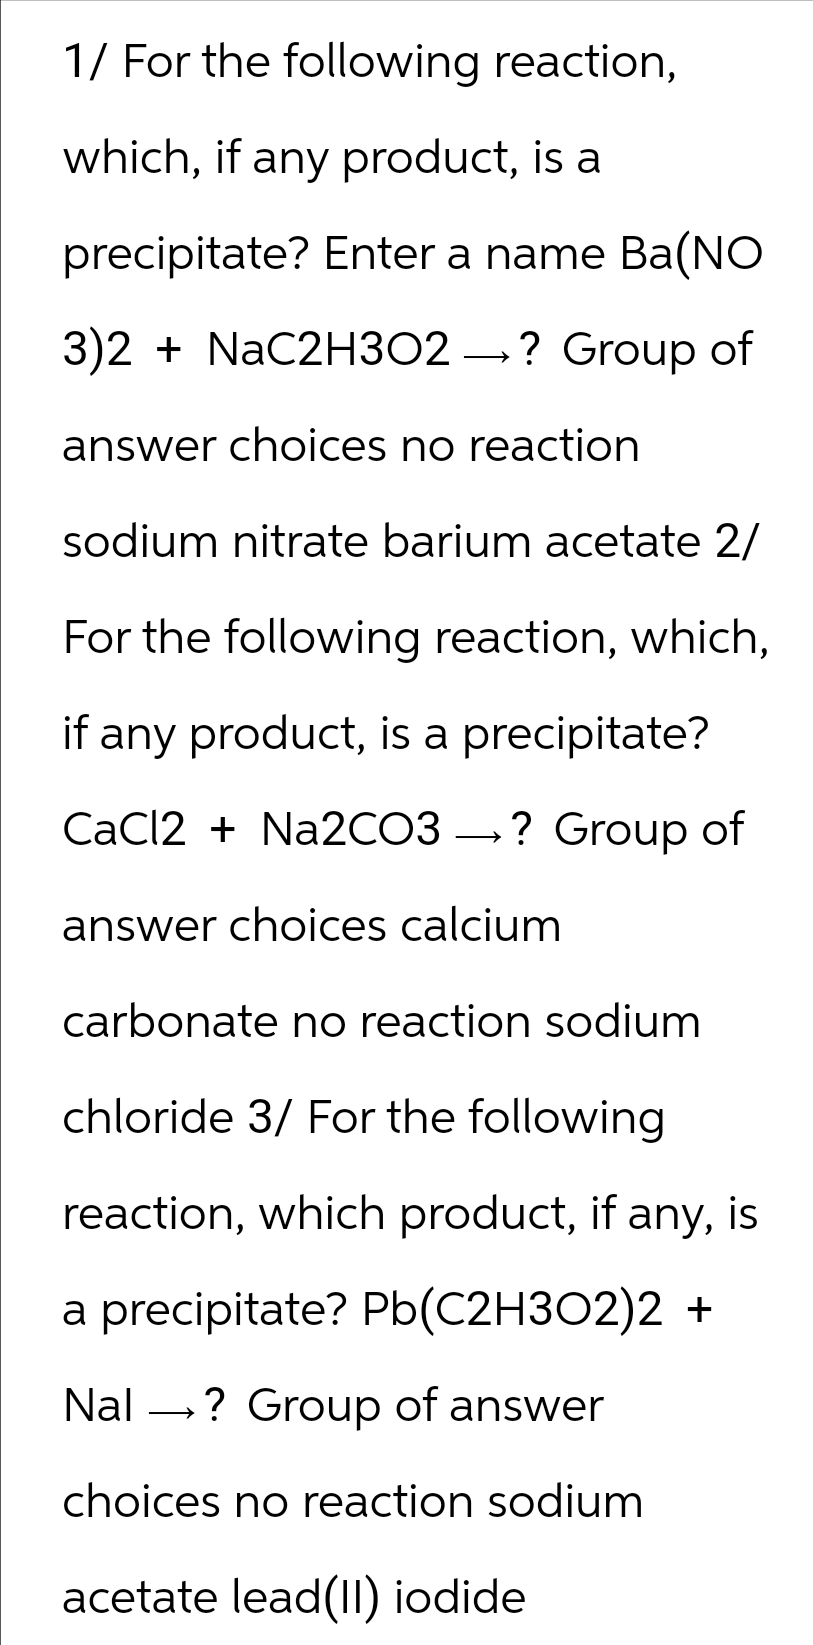 1/ For the following reaction,
which, if any product, is a
precipitate? Enter a name Ba(NO
3)2 + NaC2H3O2 →? Group of
answer choices no reaction
sodium nitrate barium acetate 2/
For the following reaction, which,
if any product, is a precipitate?
CaCl2 + Na2CO3? Group of
answer choices calcium
carbonate no reaction sodium
chloride 3/ For the following
reaction, which product, if any, is
a precipitate? Pb(C2H3O2)2 +
Nal? Group of answer
choices no reaction sodium
acetate lead(II) iodide